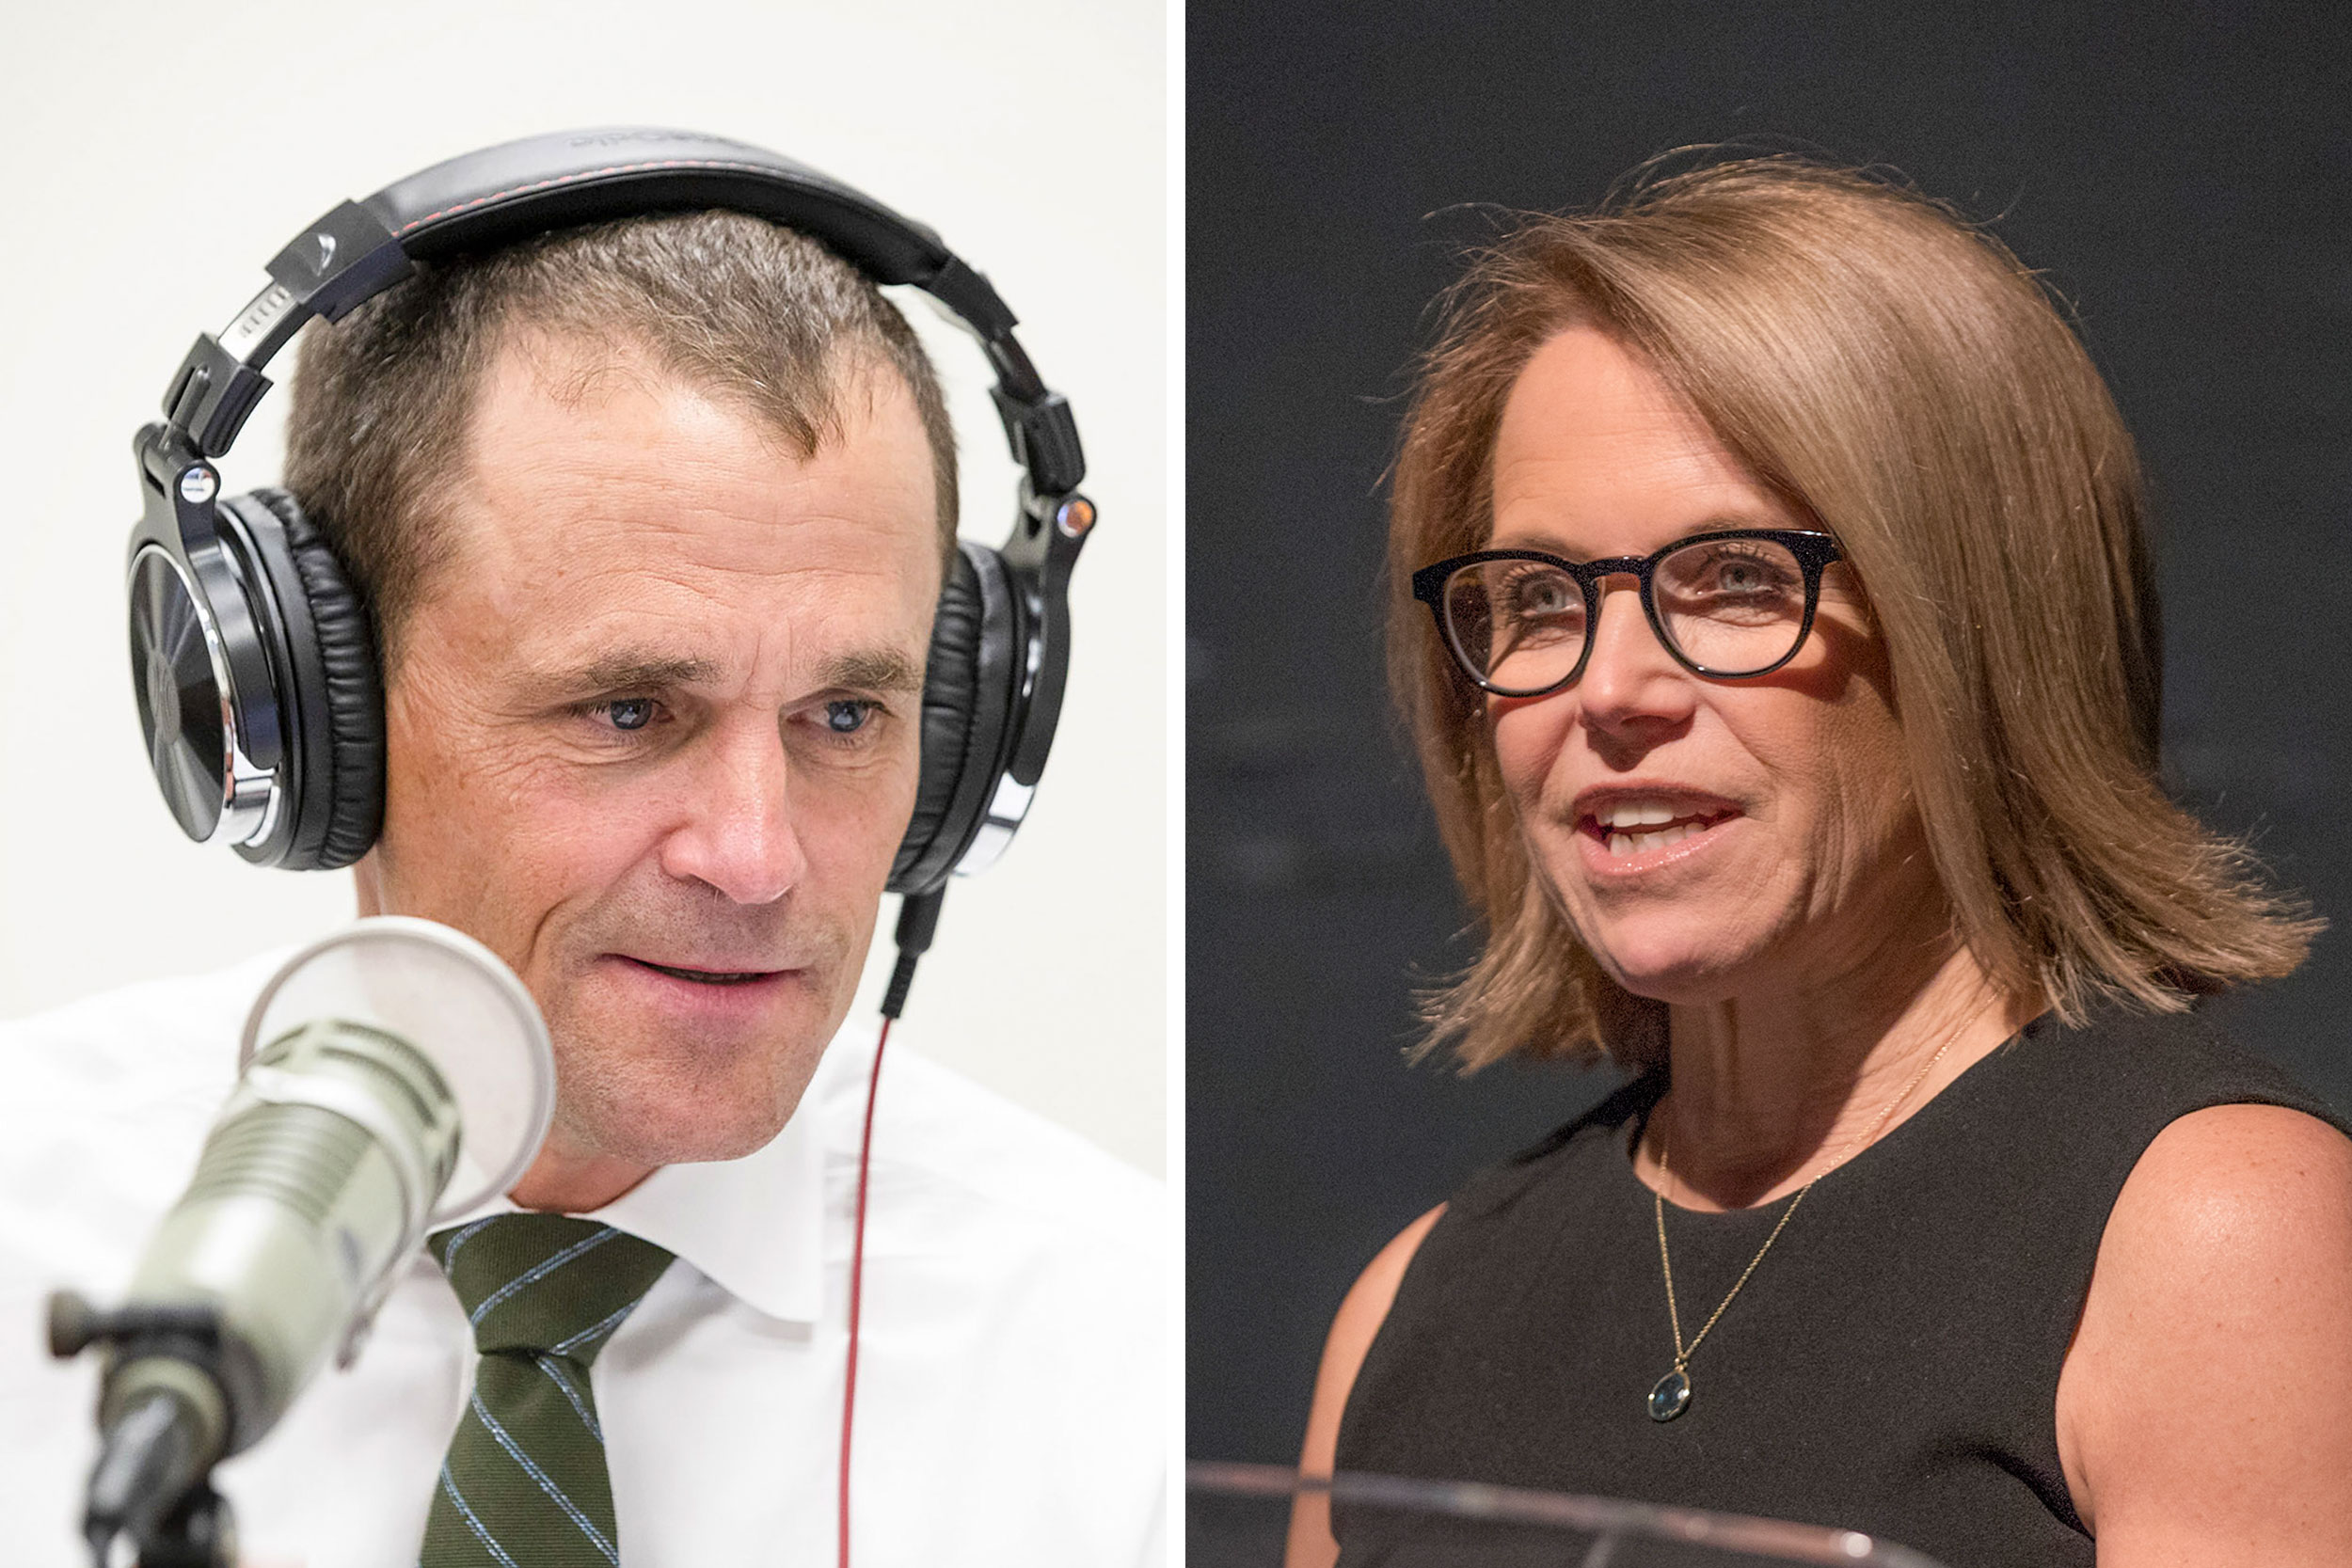 Jim Ryan wears headphone and speaks into a microphone. Katie Couric stands at a podium.